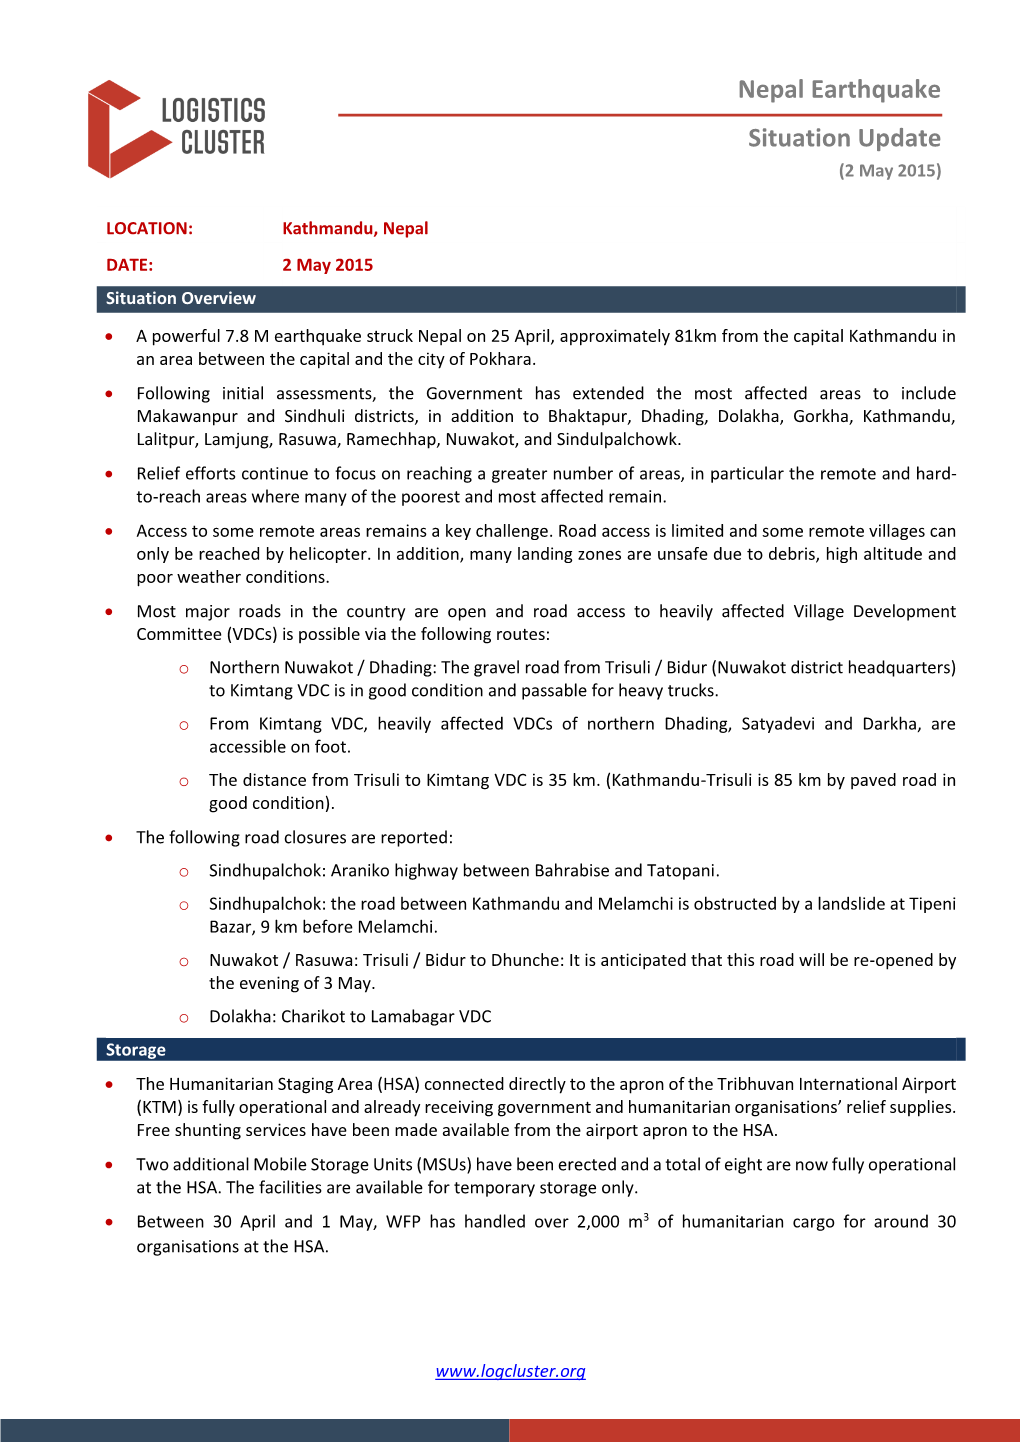 Nepal Earthquake Situation Update (2 May 2015)